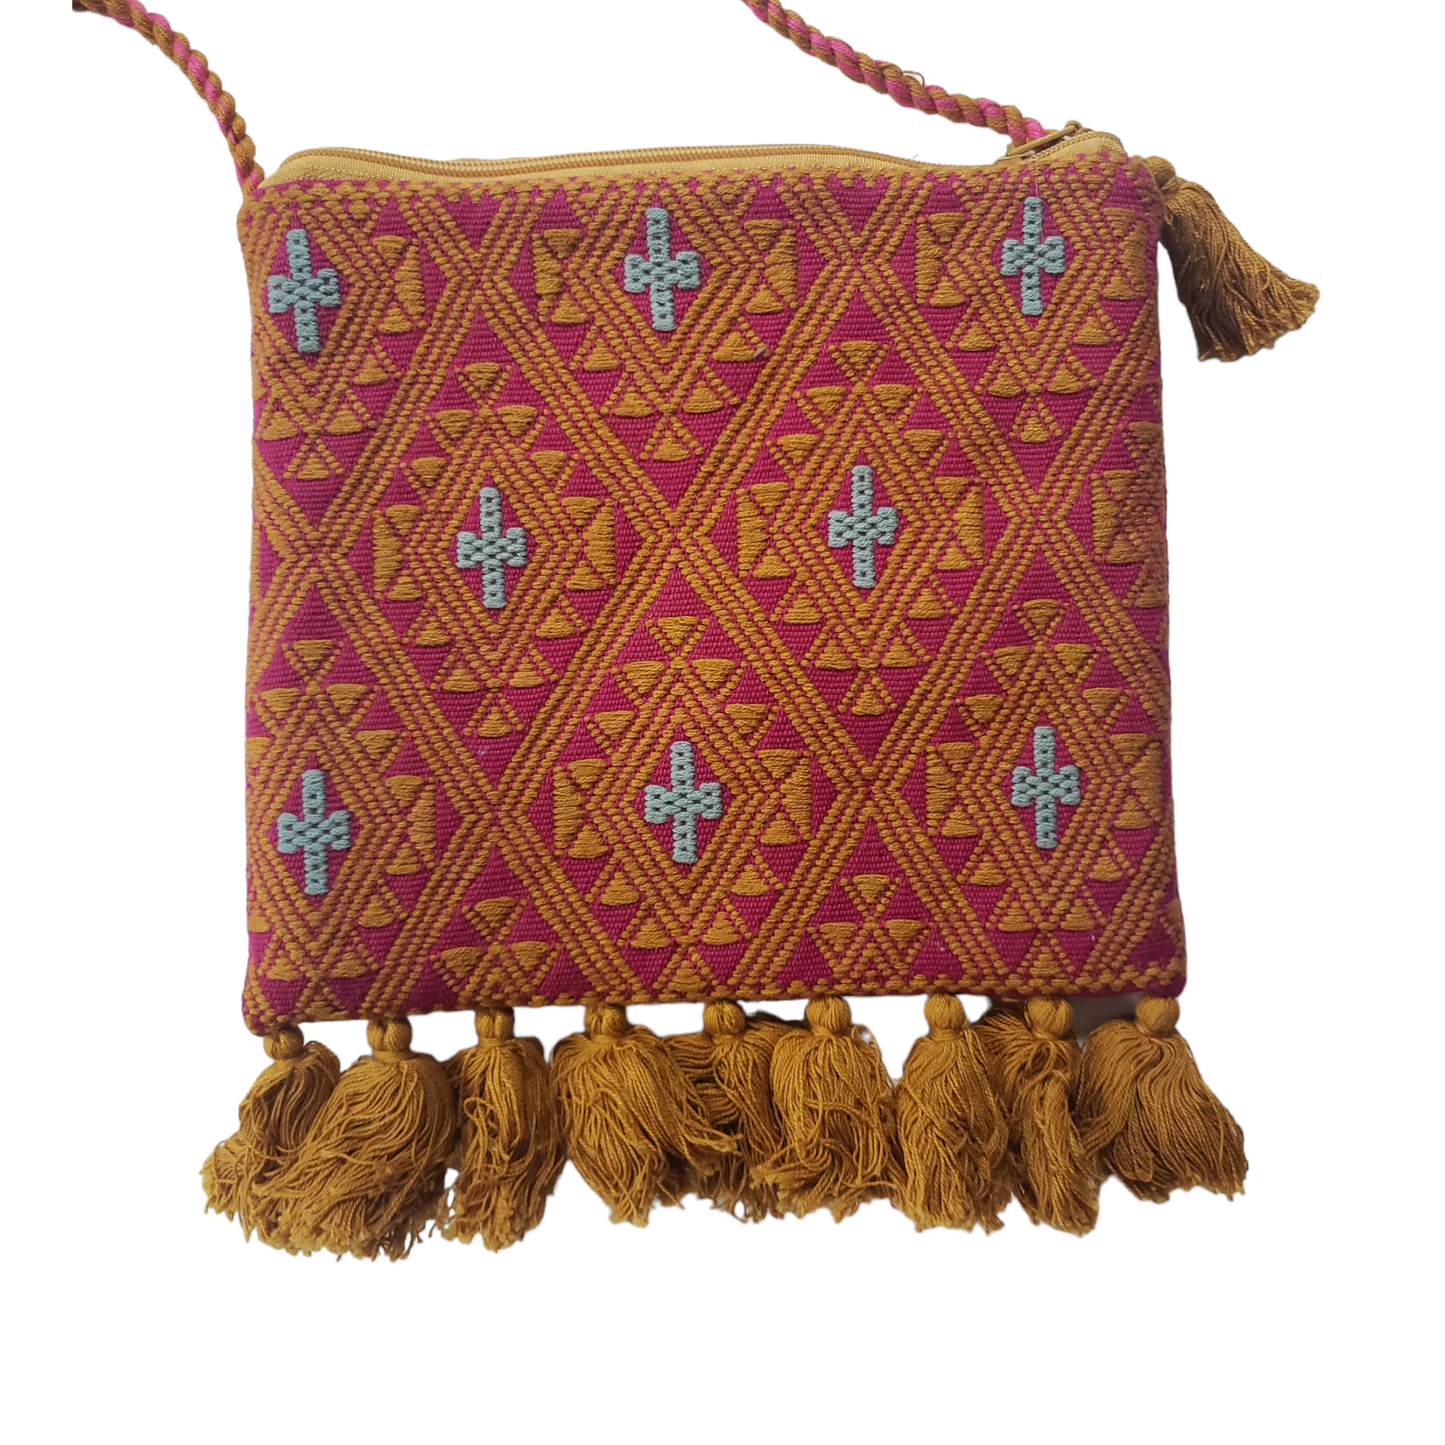 Embroidered Purse from Chiapas Mexico